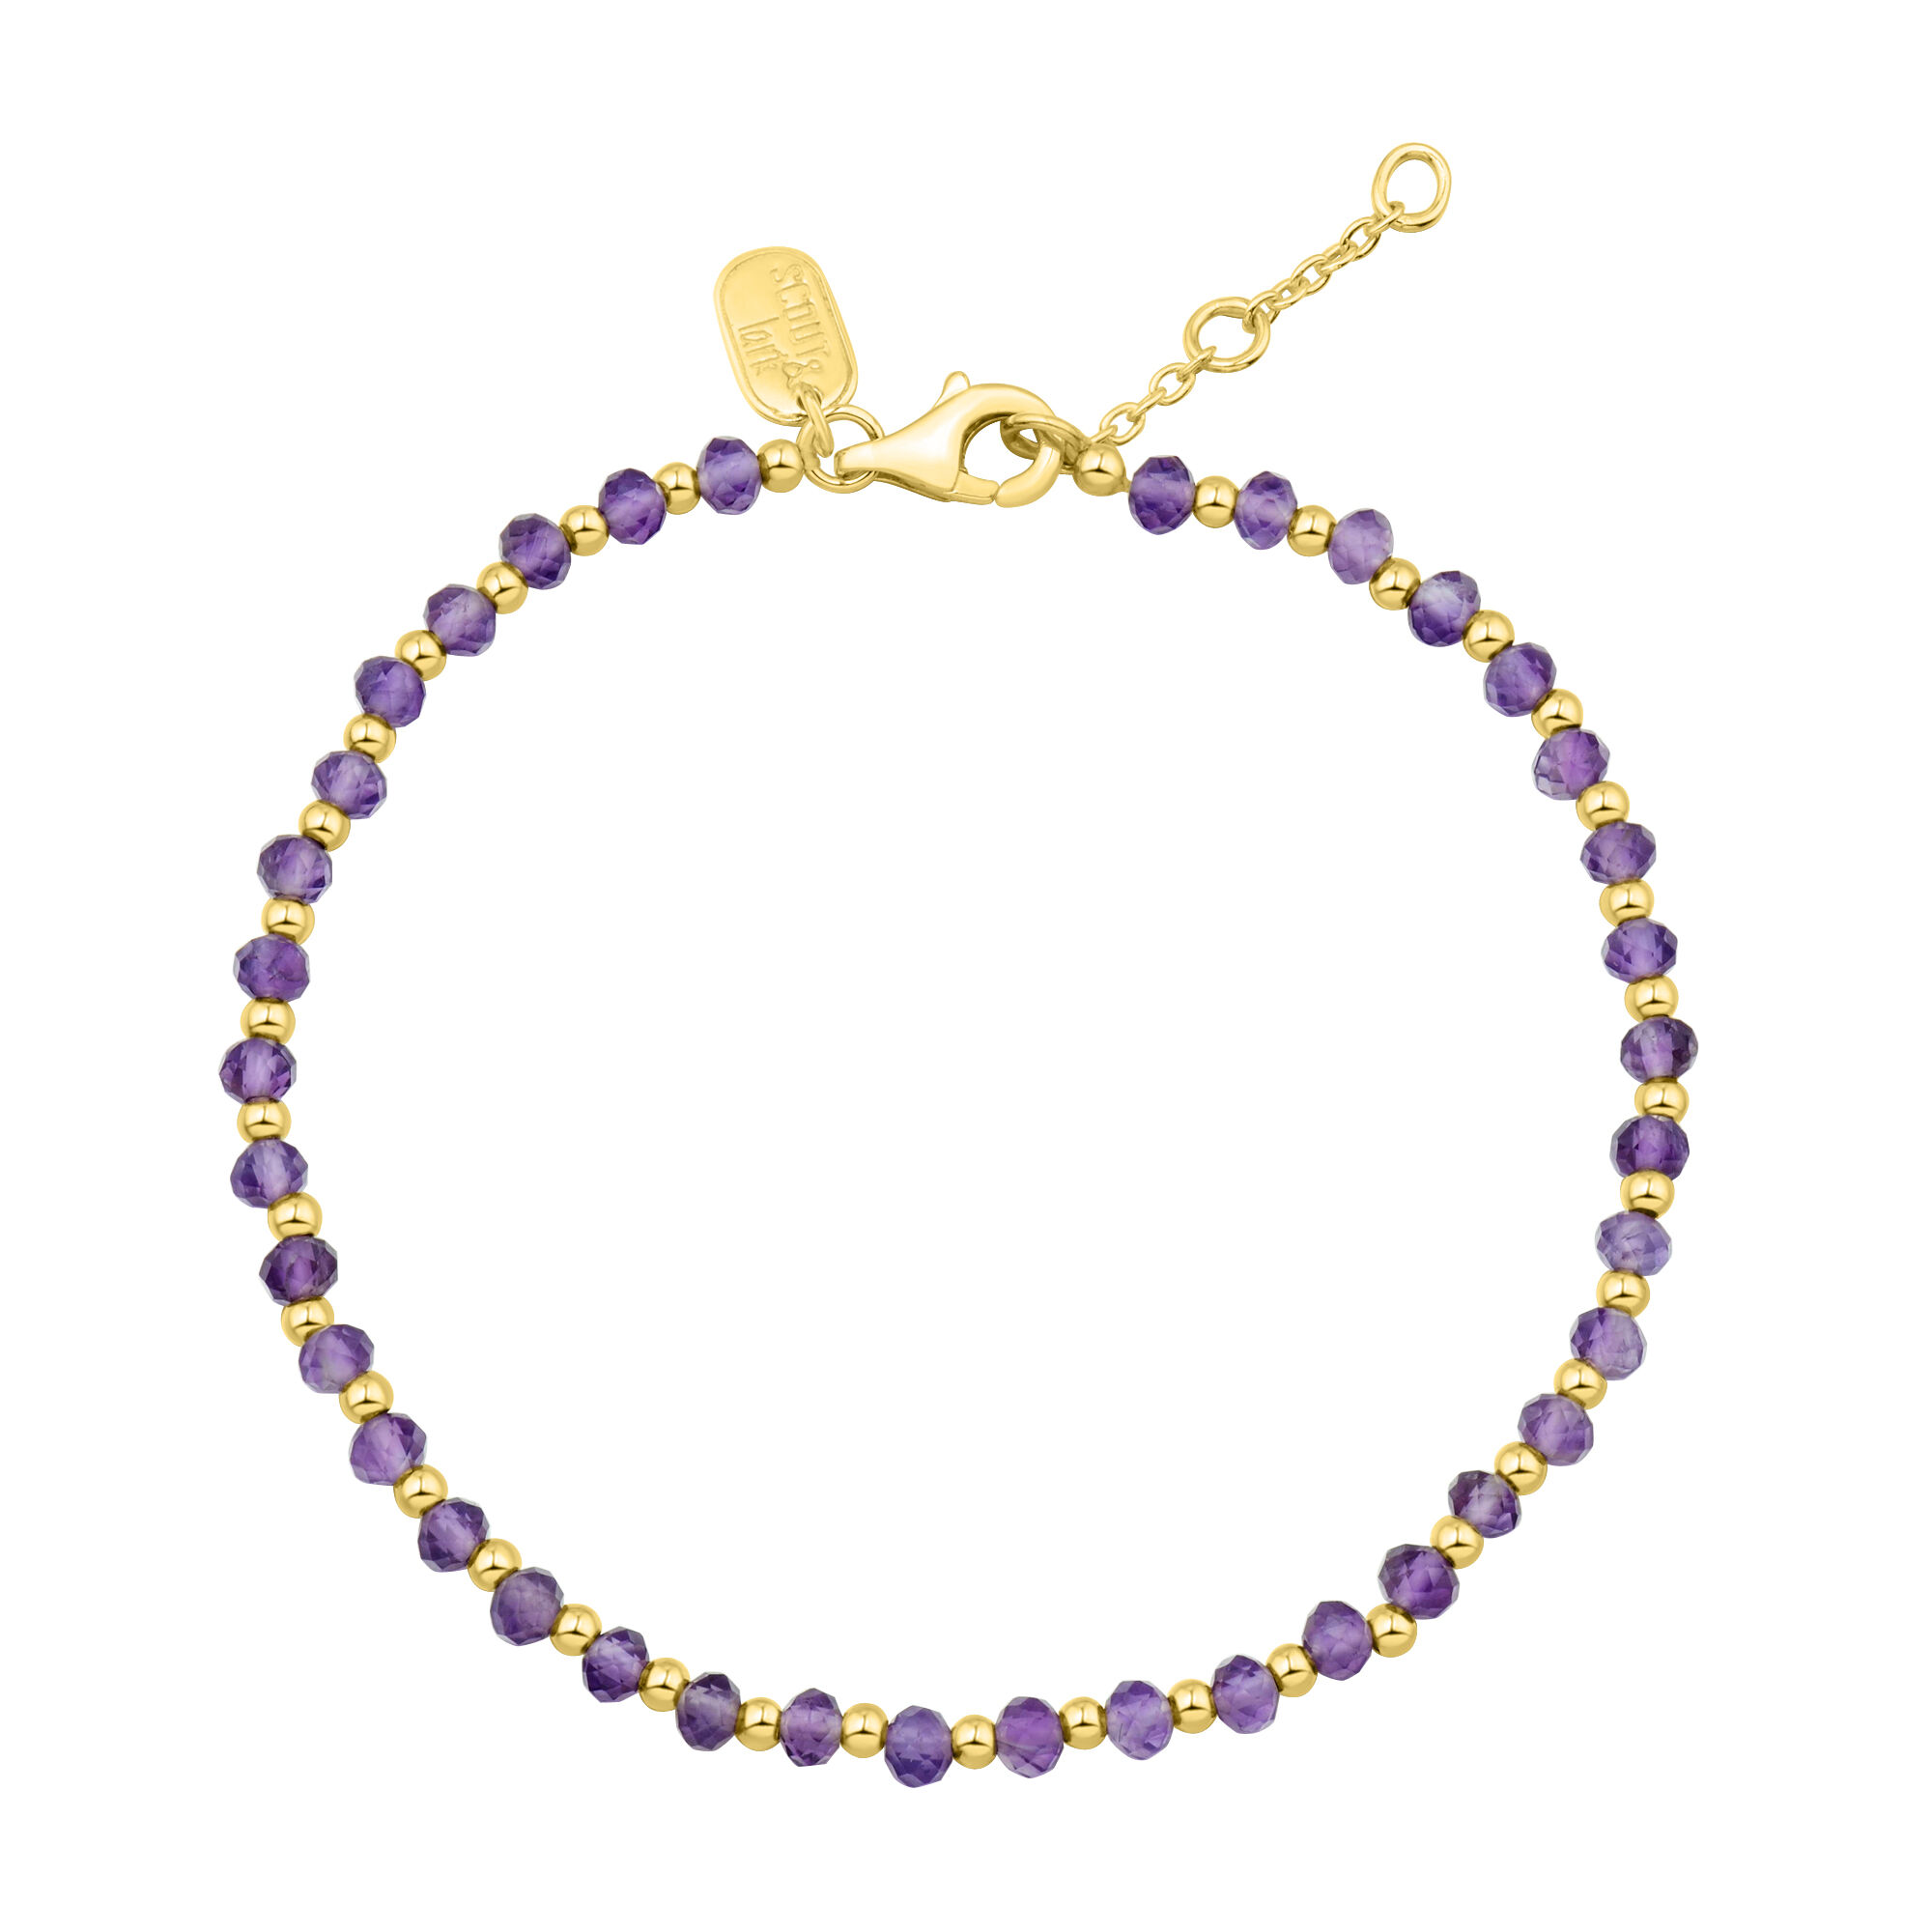 Amethyst Stone Bracelet For Every Occasion - Made Here with Love